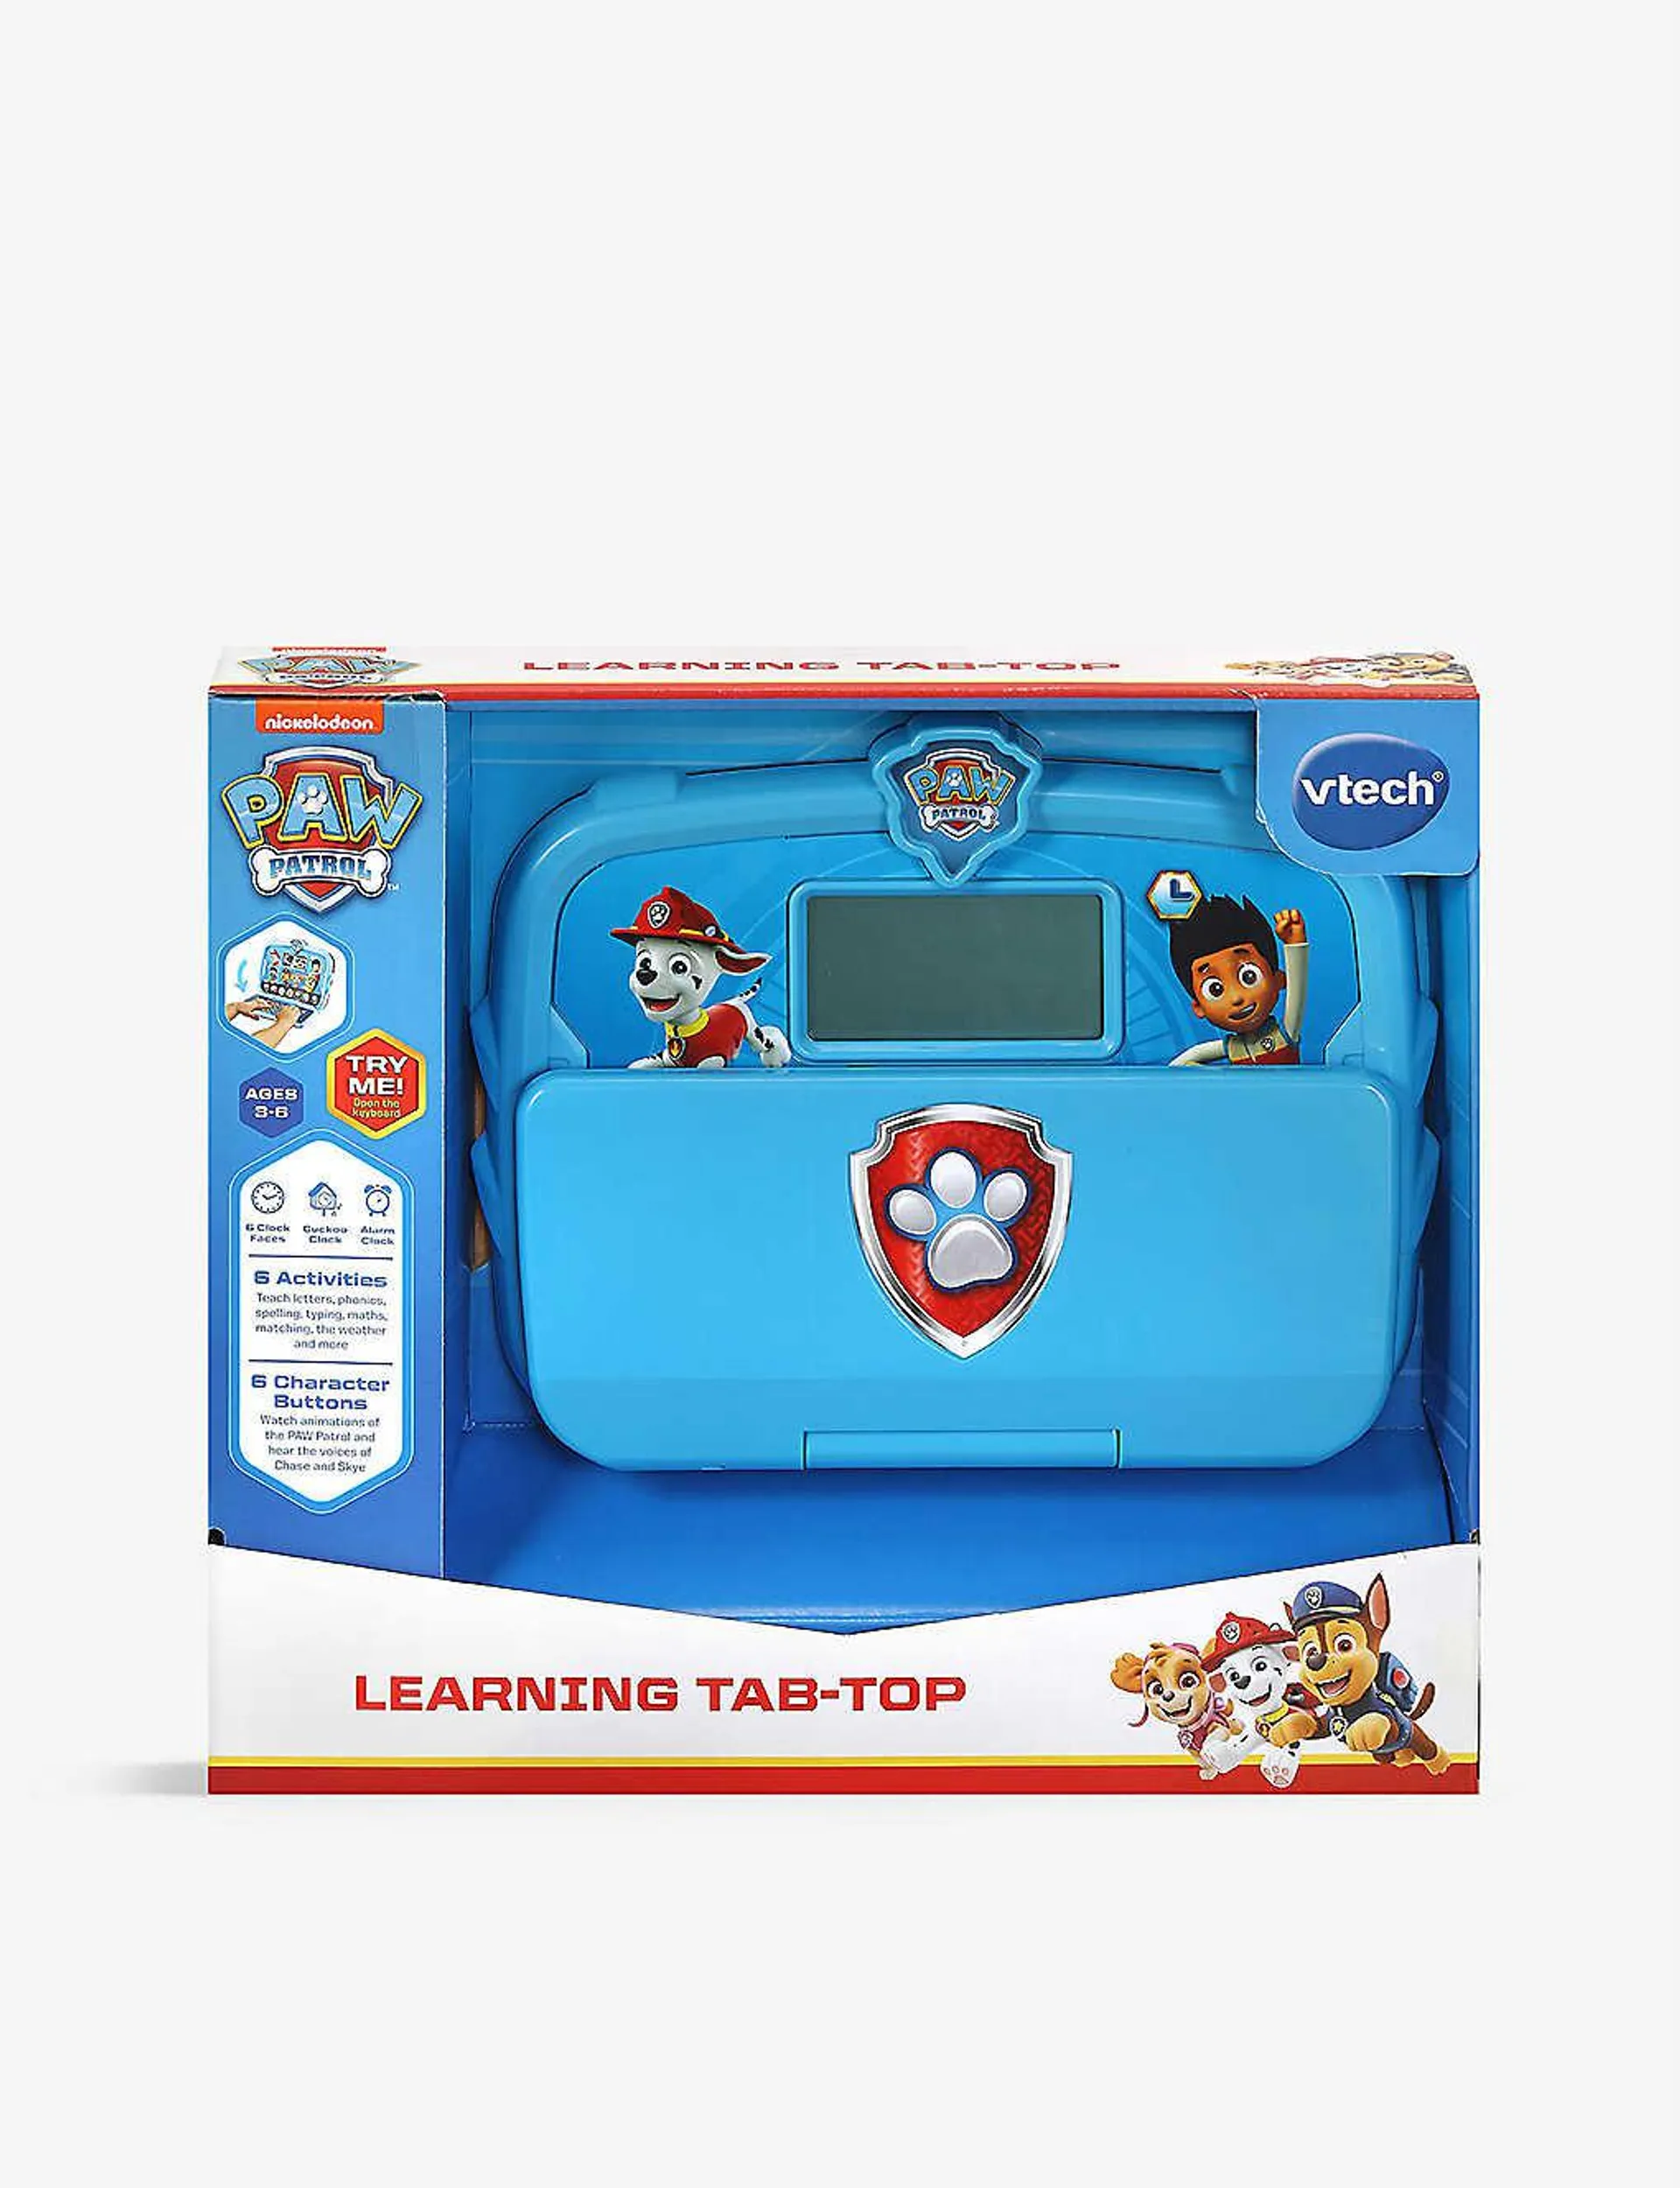 Paw Patrol learning tap-top